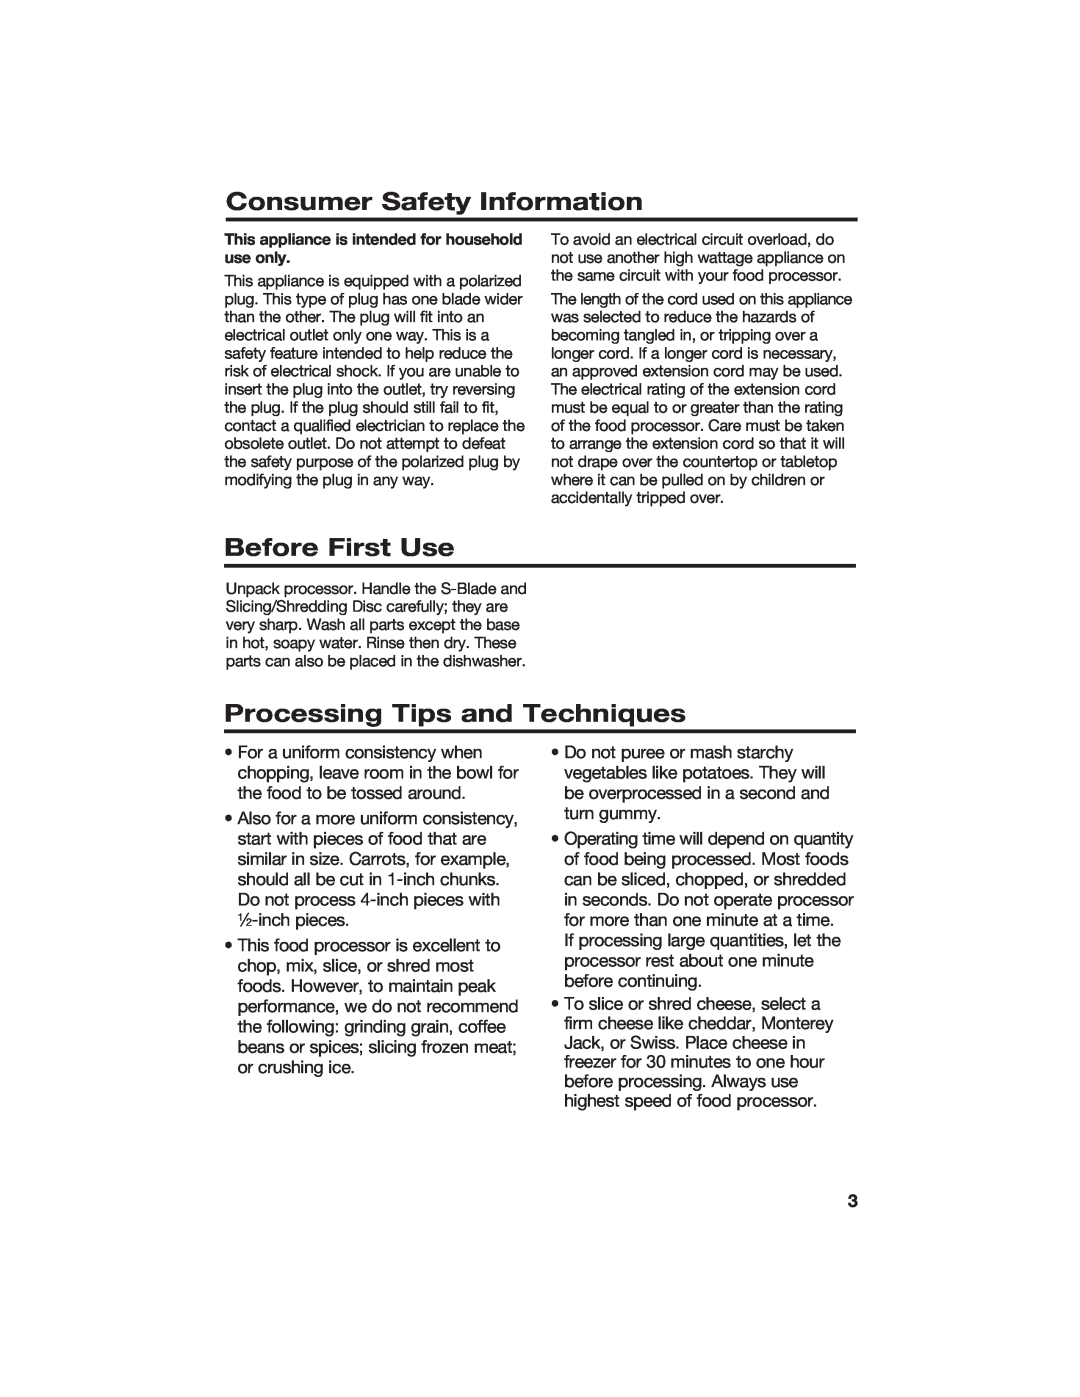 Hamilton Beach 840072000 manual Consumer Safety Information, Before First Use, Processing Tips and Techniques 